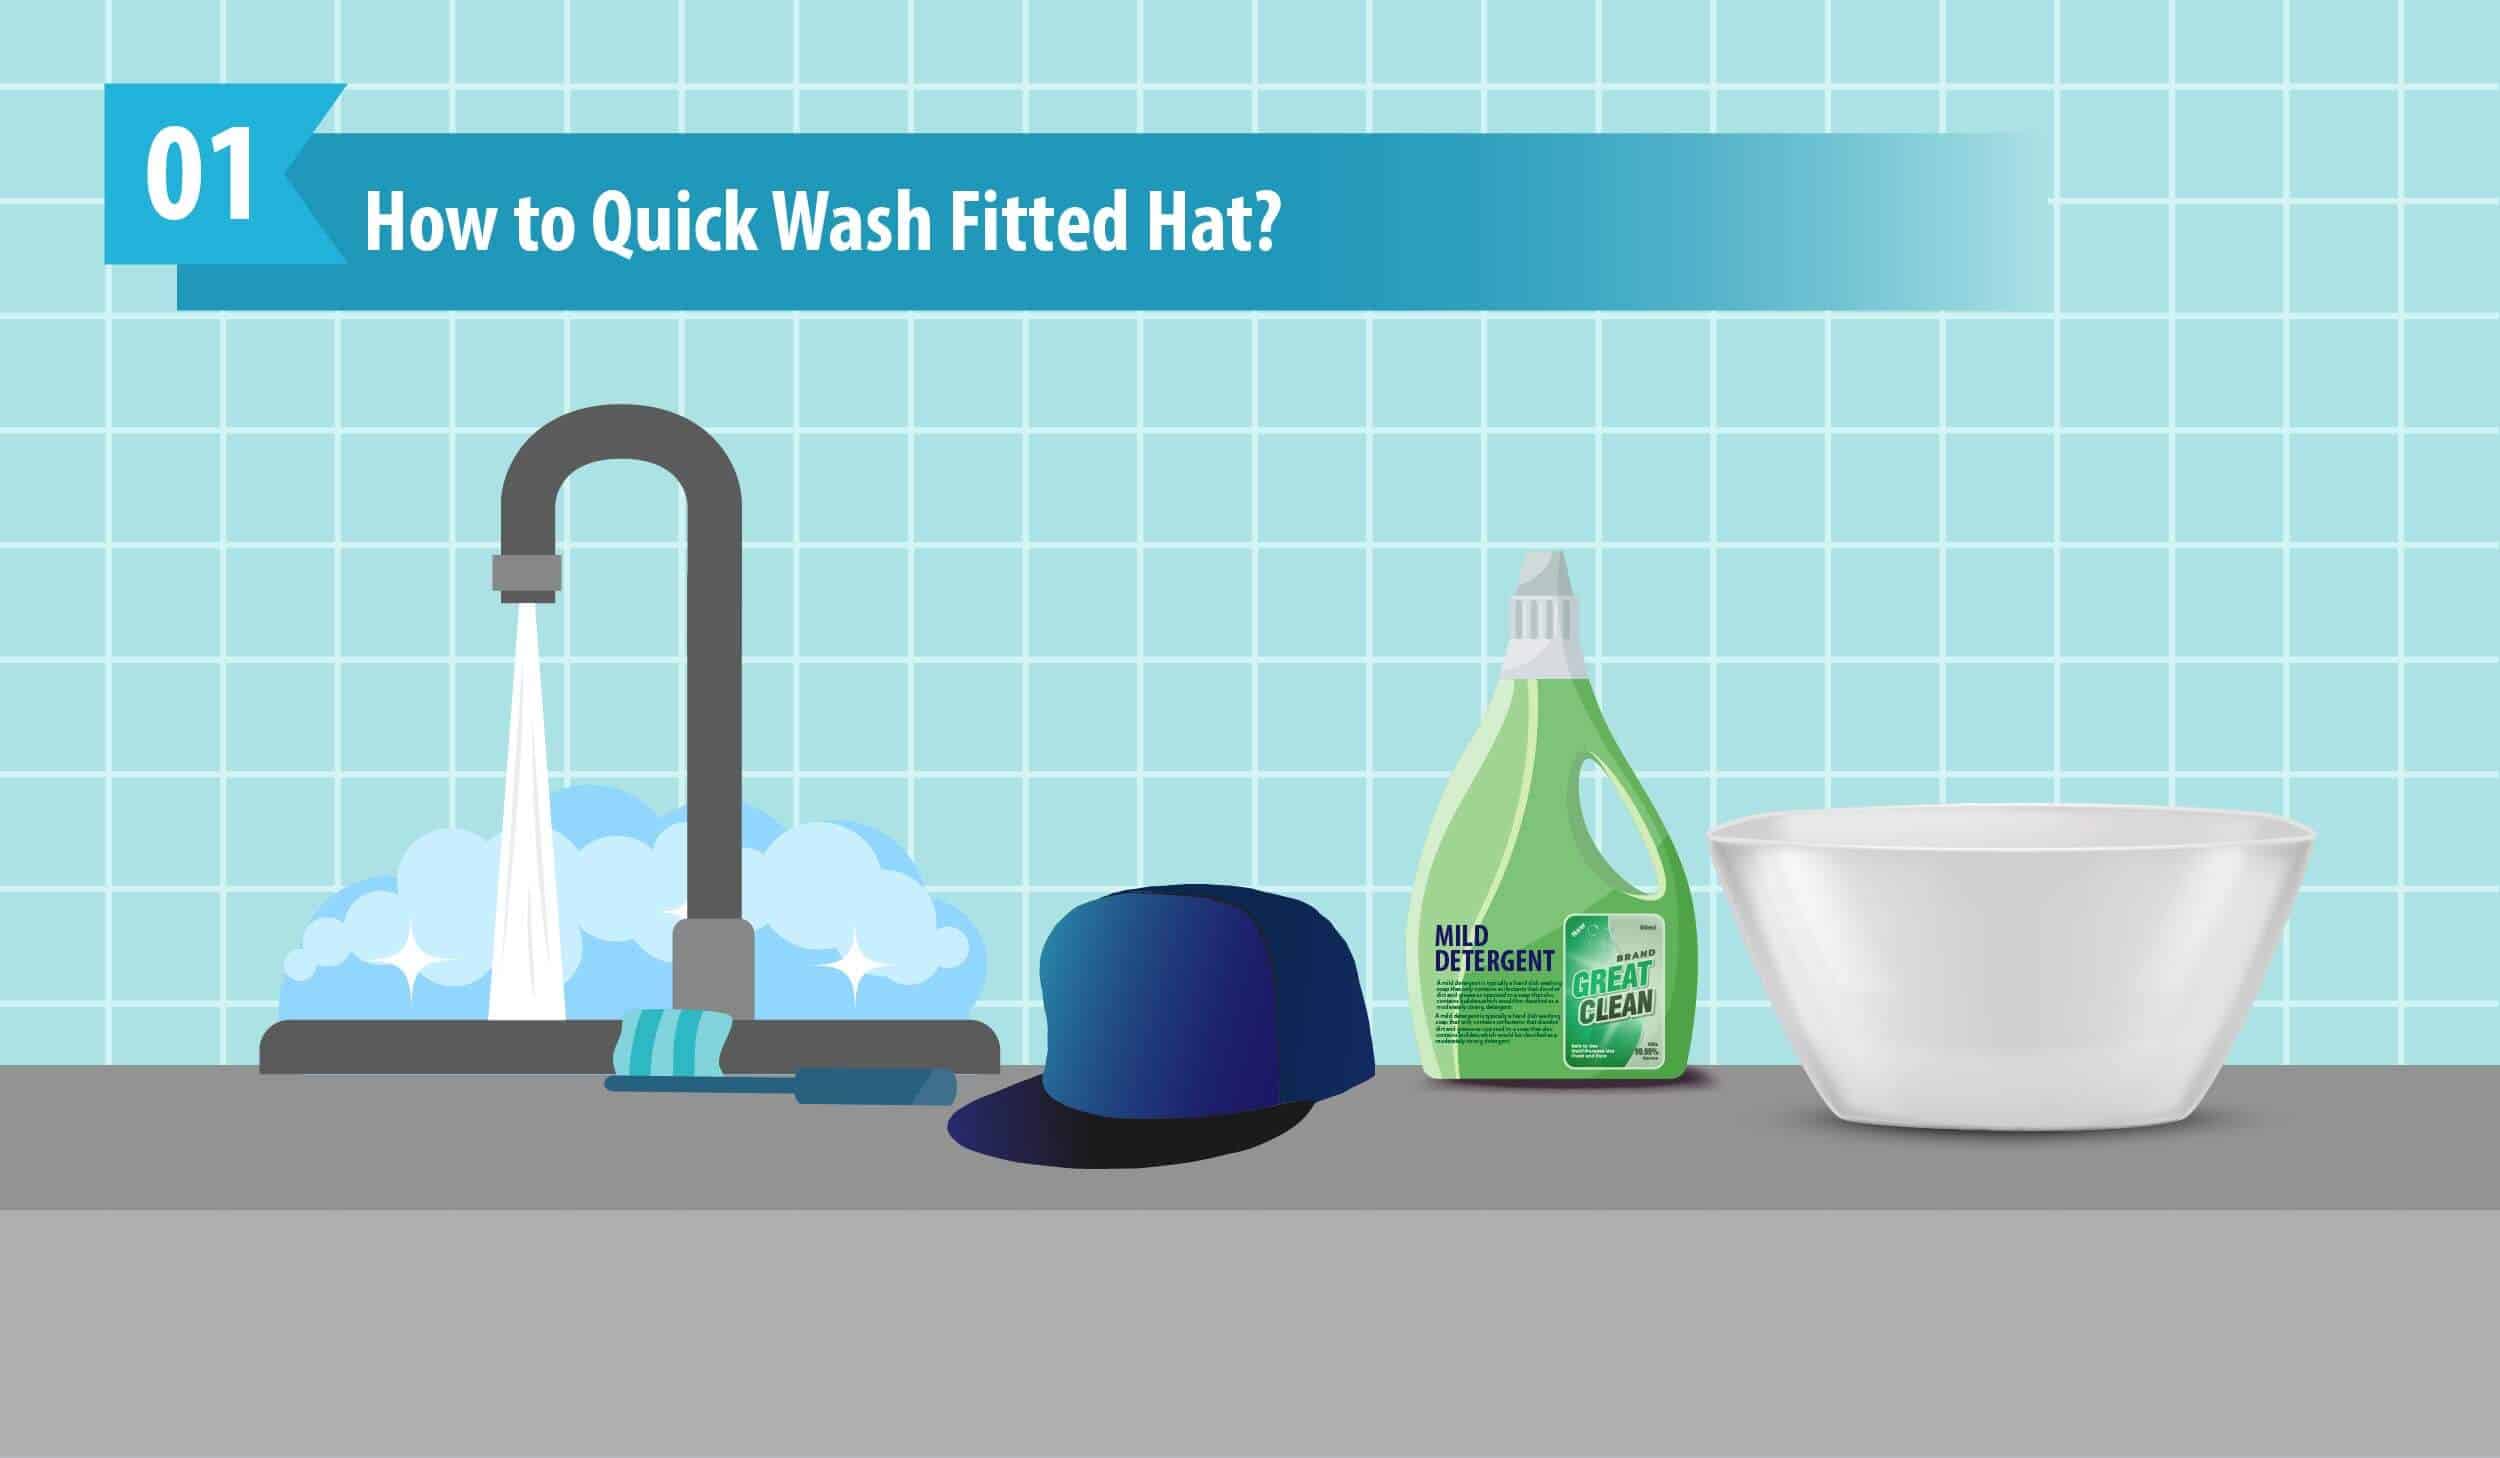 How to Quick Wash Fitted Hat